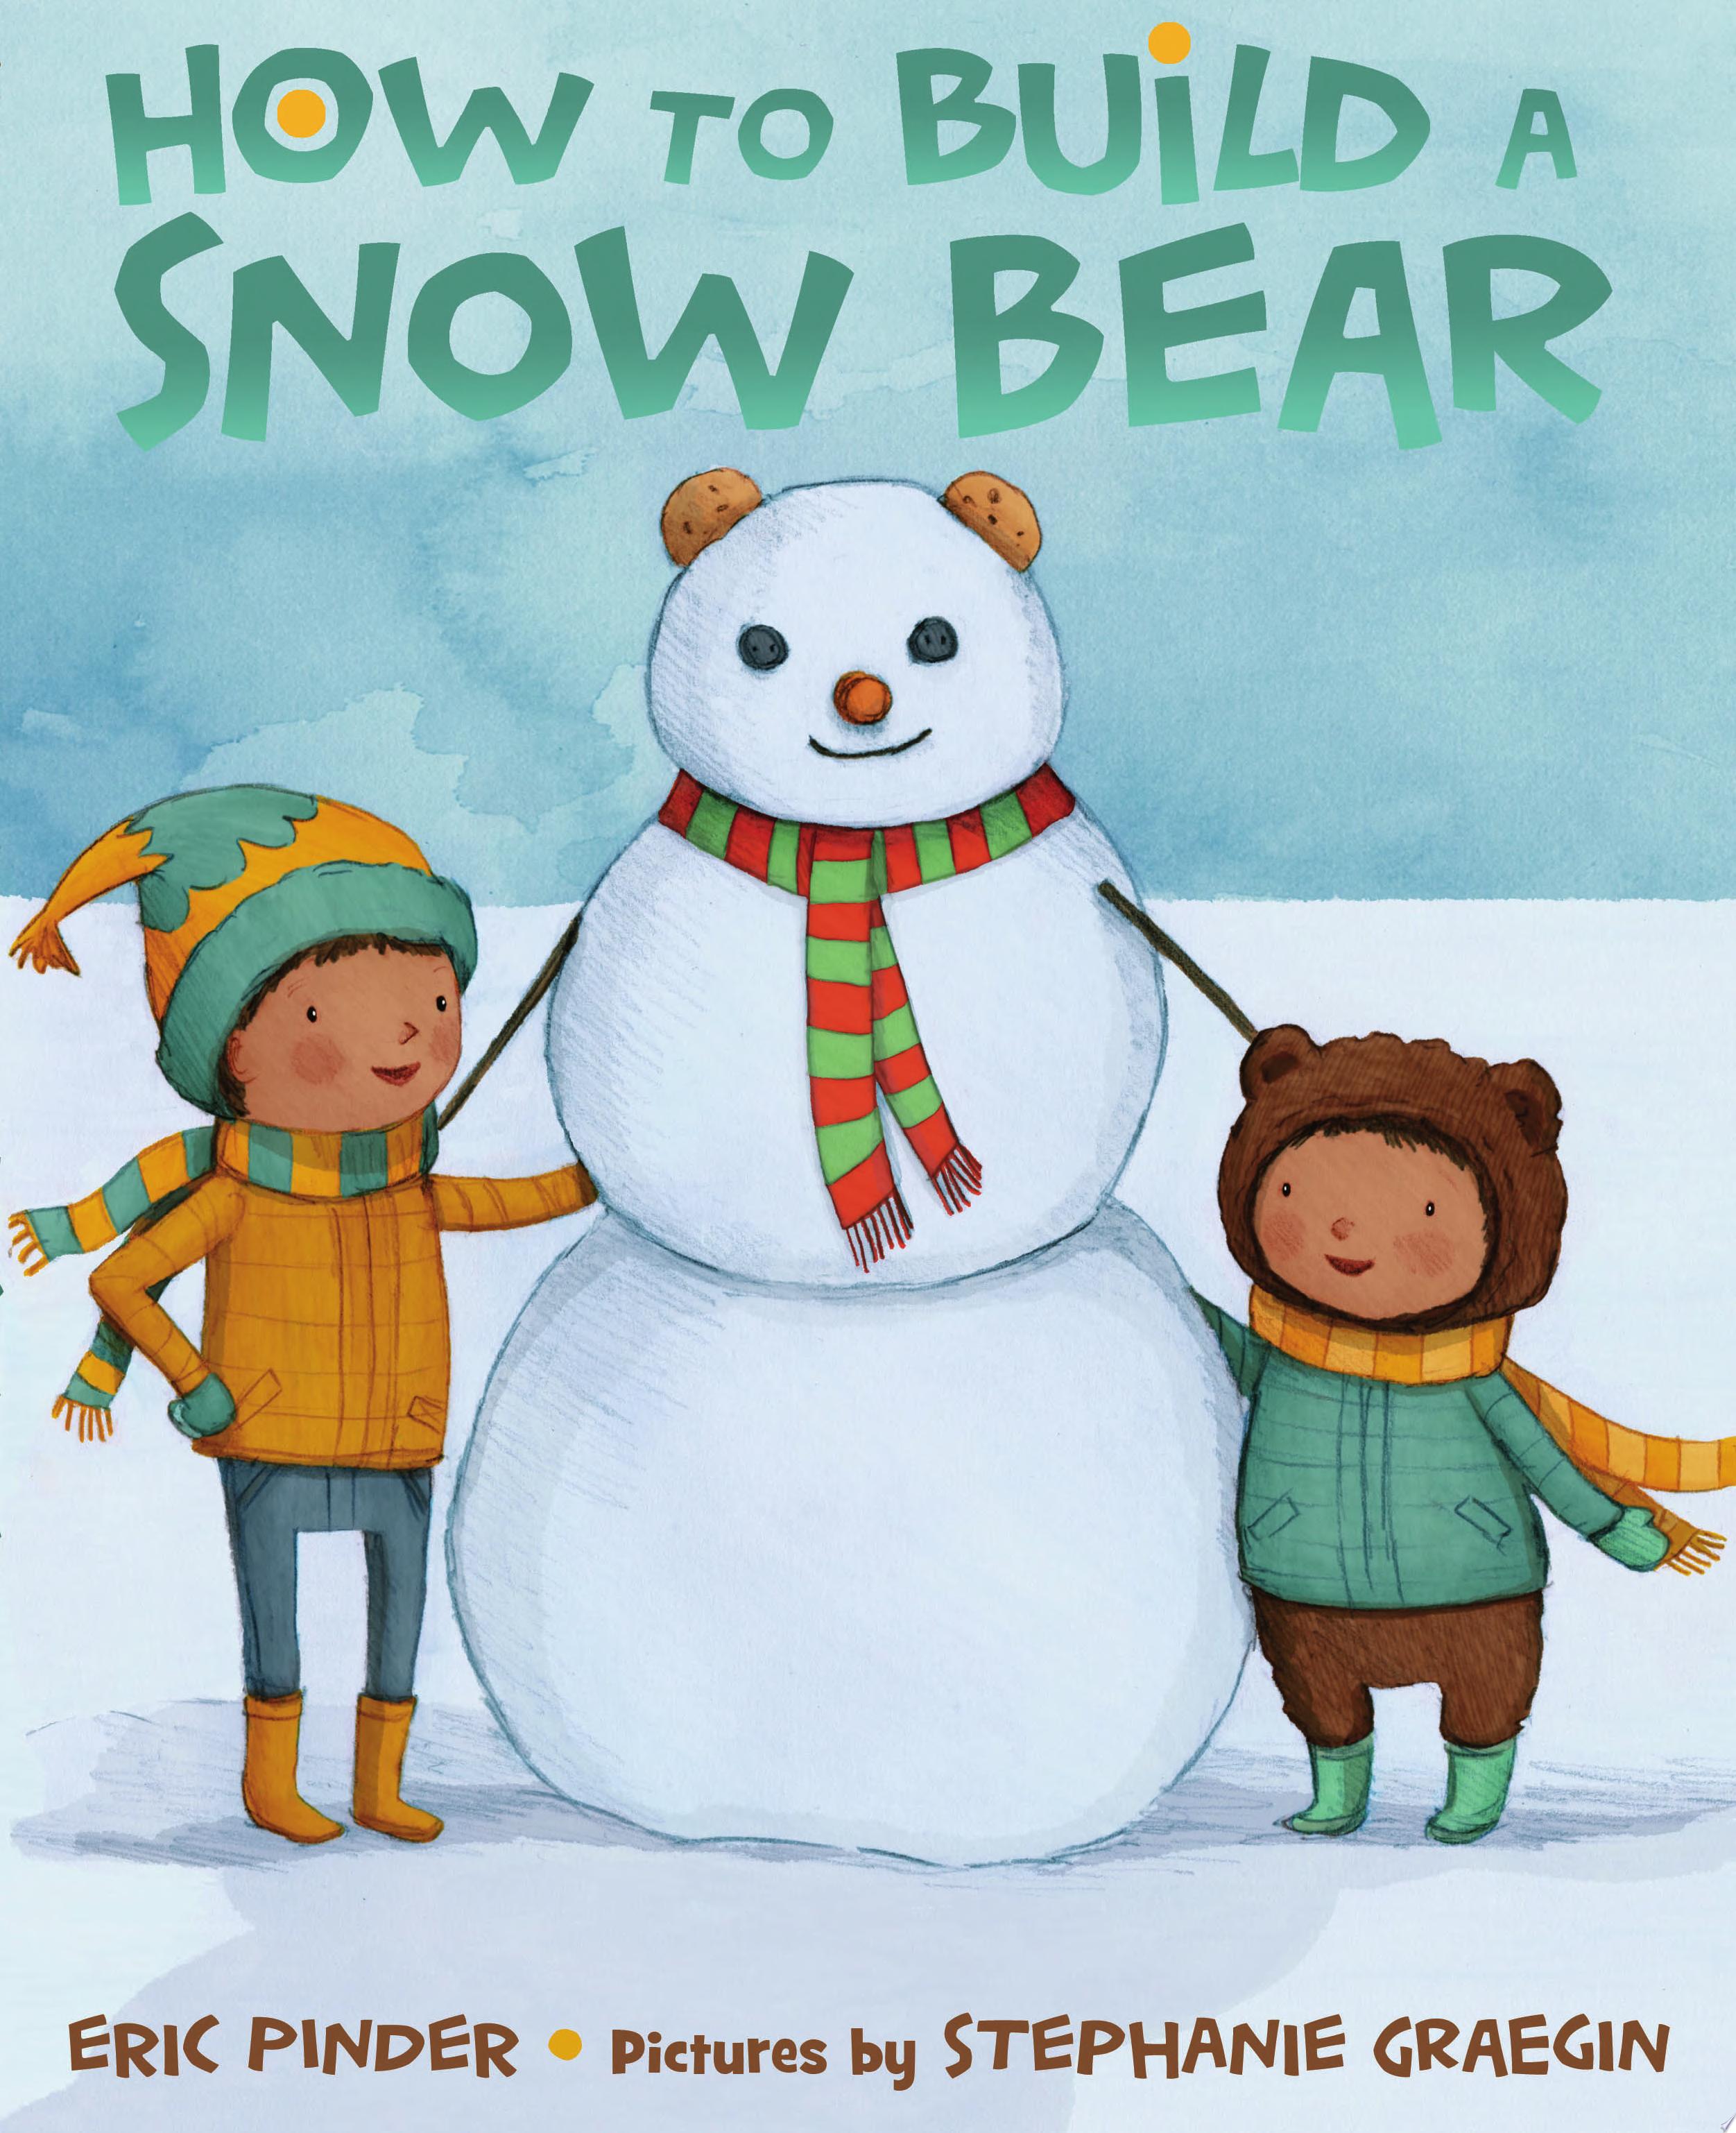 Image for "How to Build a Snow Bear"